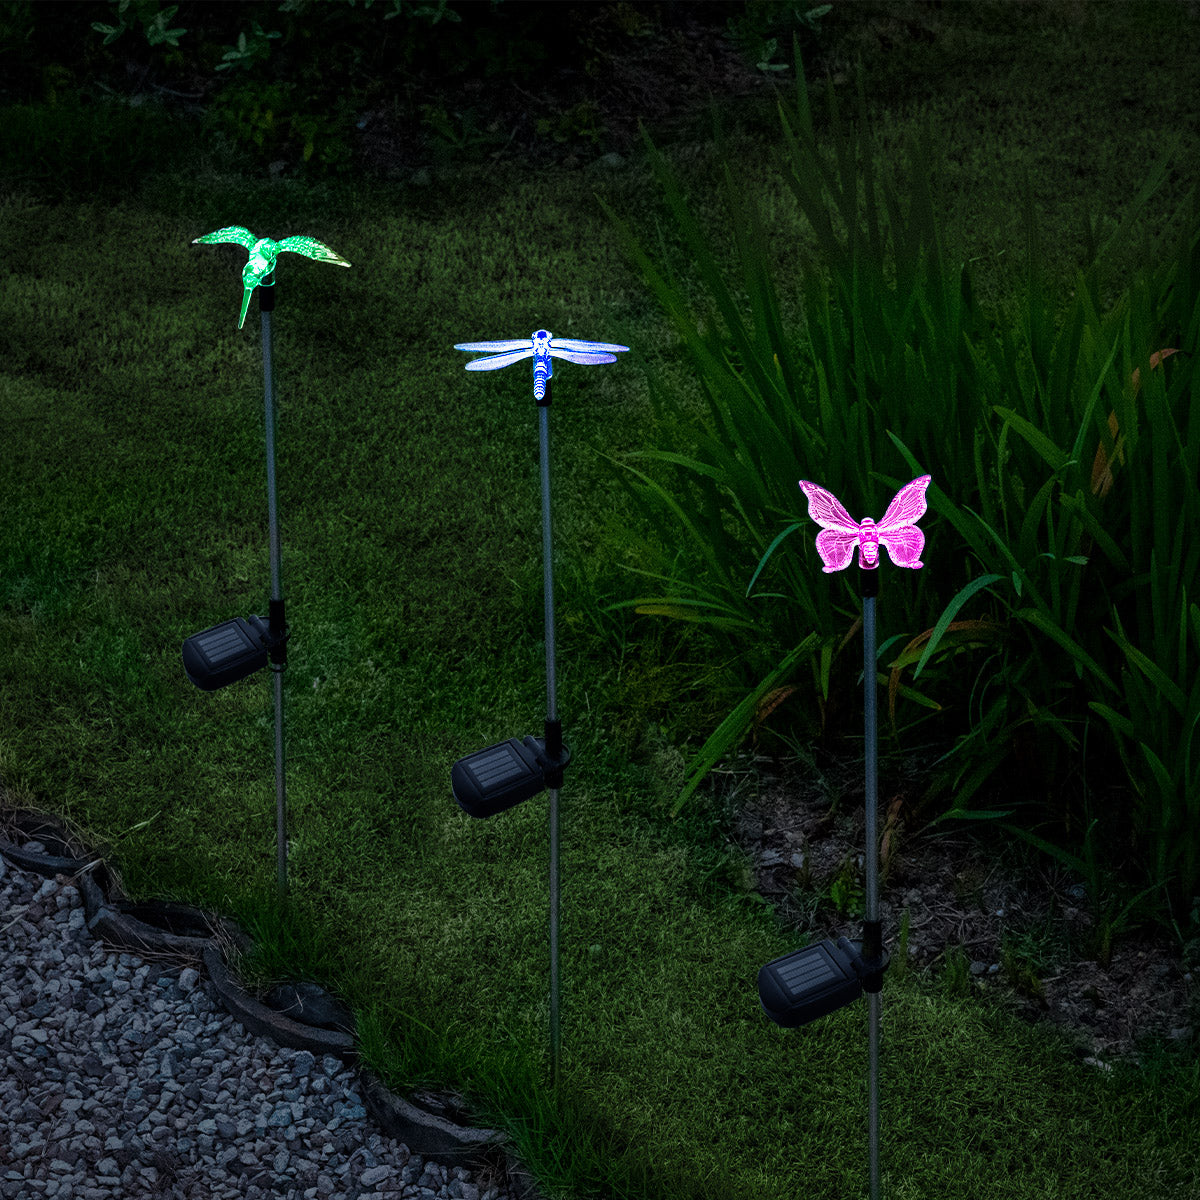 Color-Changing Hummingbird, dragonfly, flower, butterfly Garden Stake Light  Set